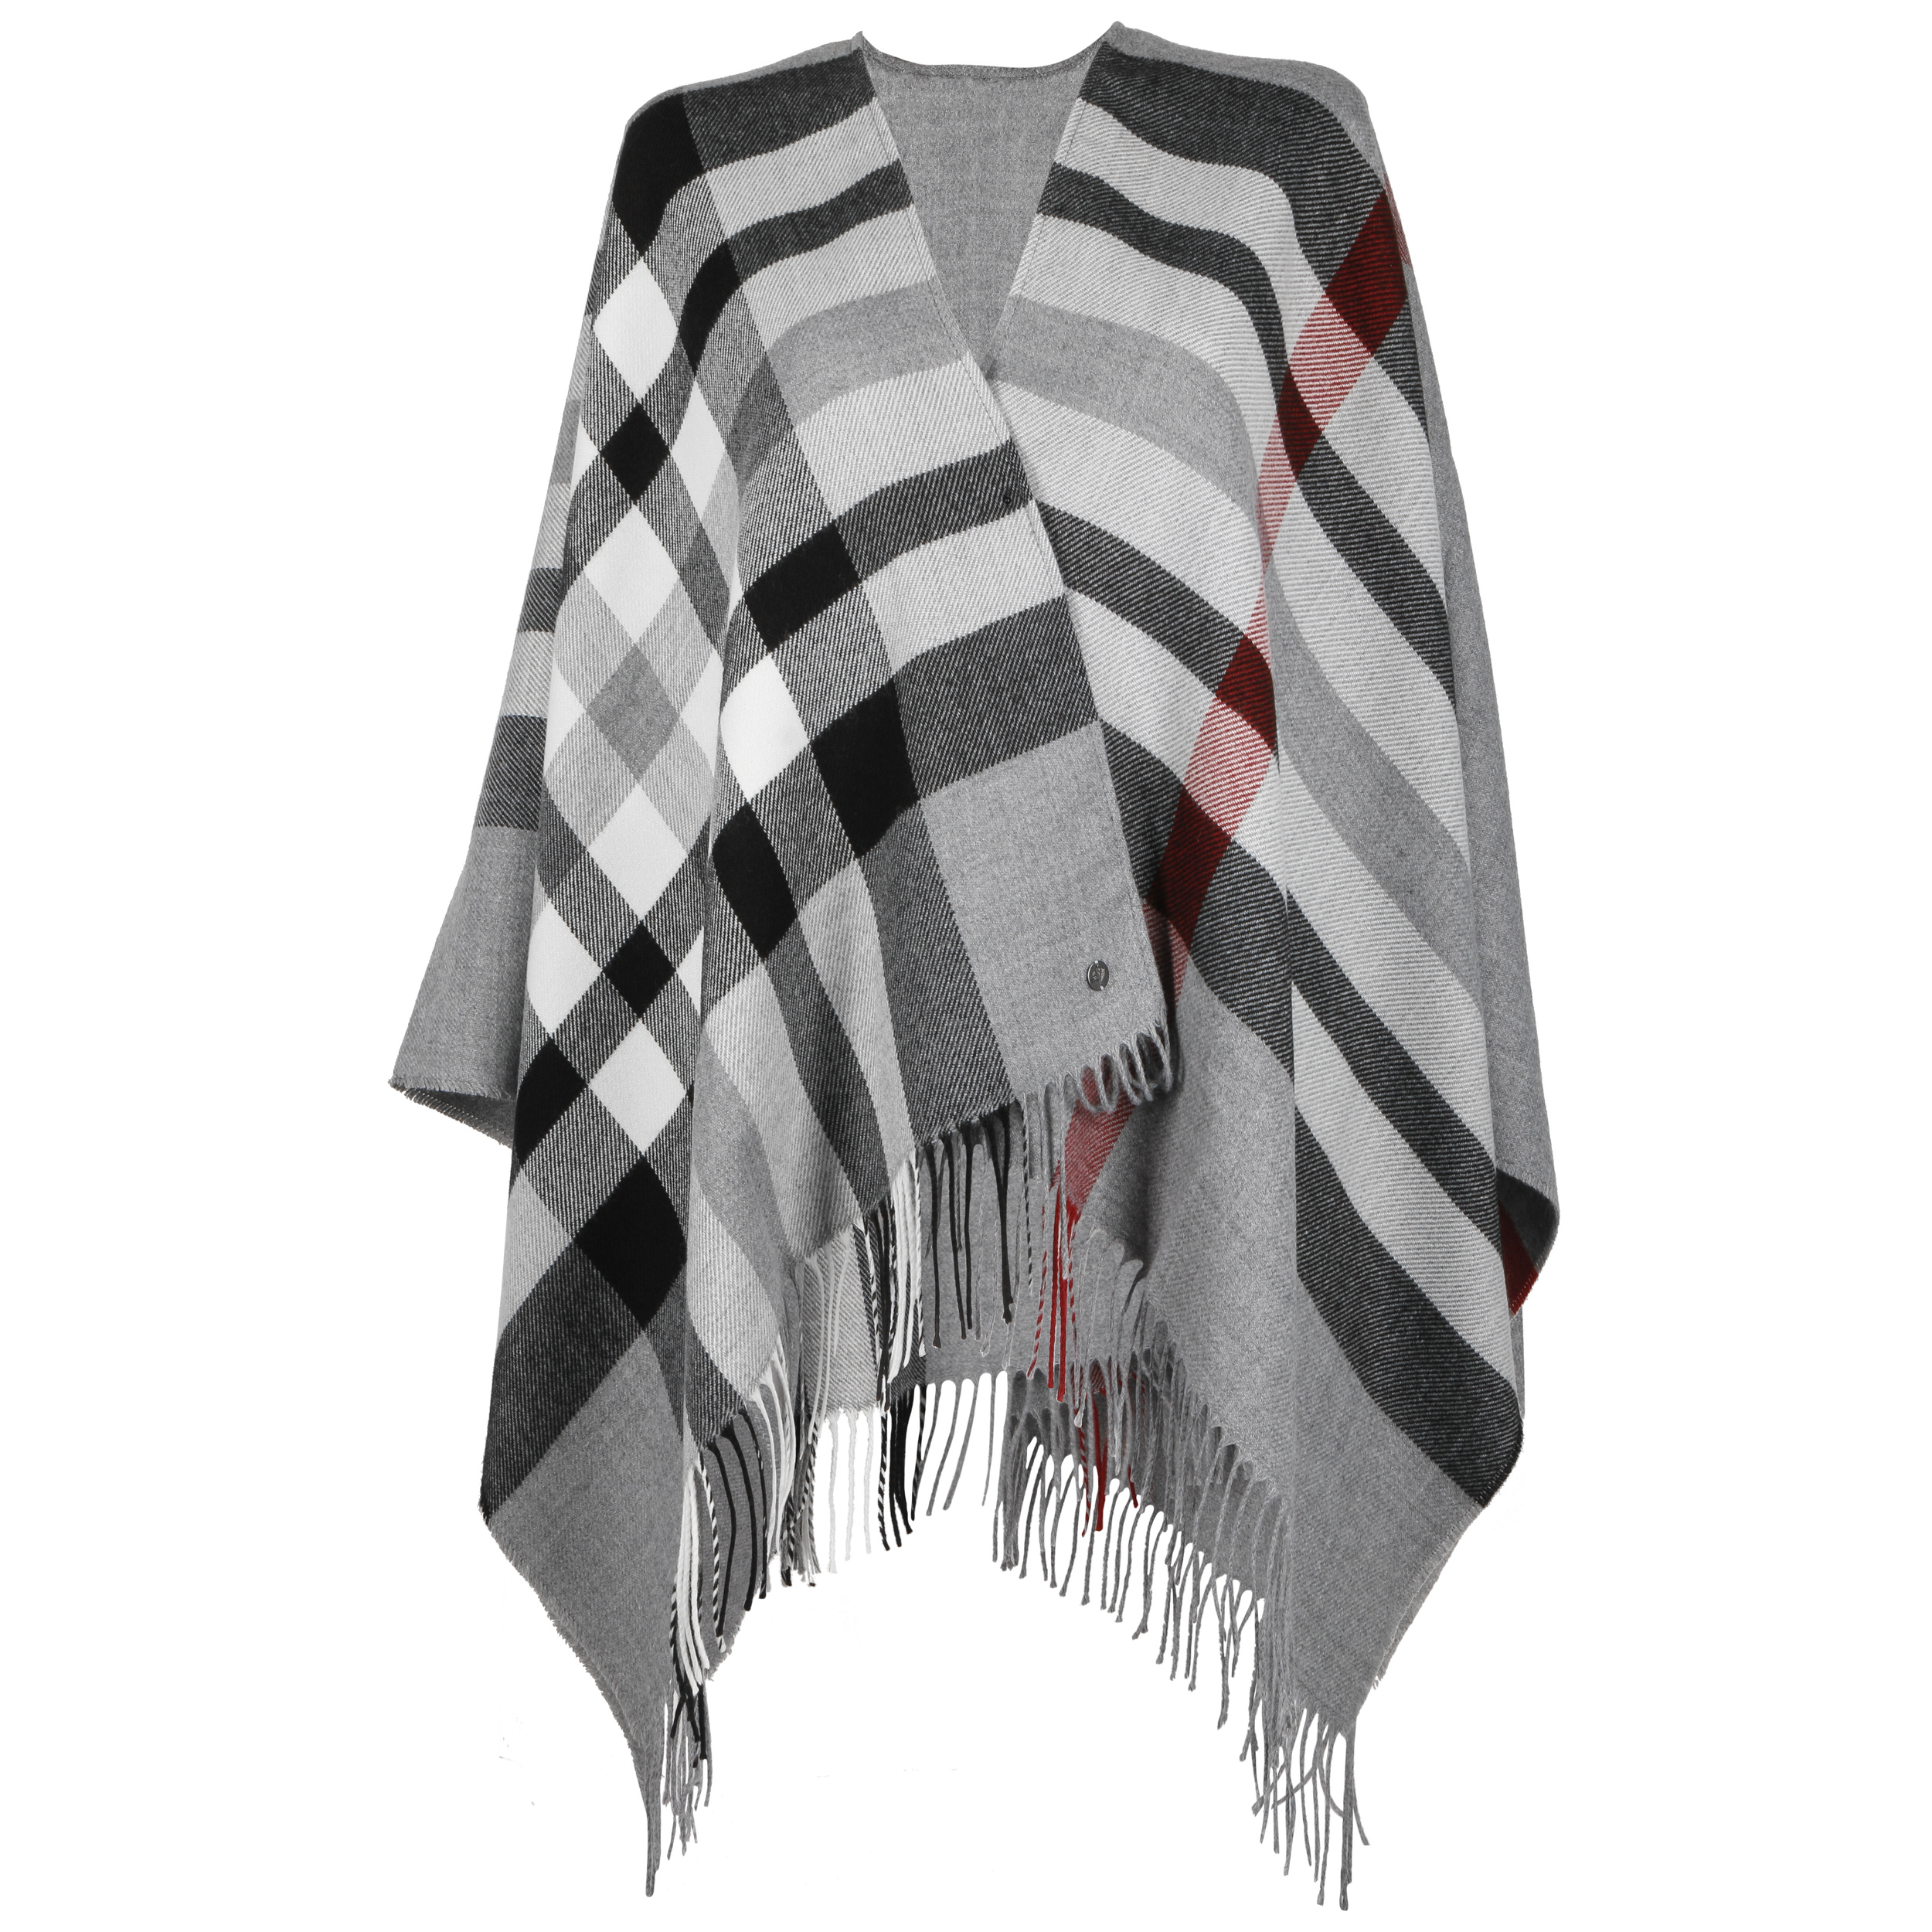 Checked Poncho by Fraas 66,10